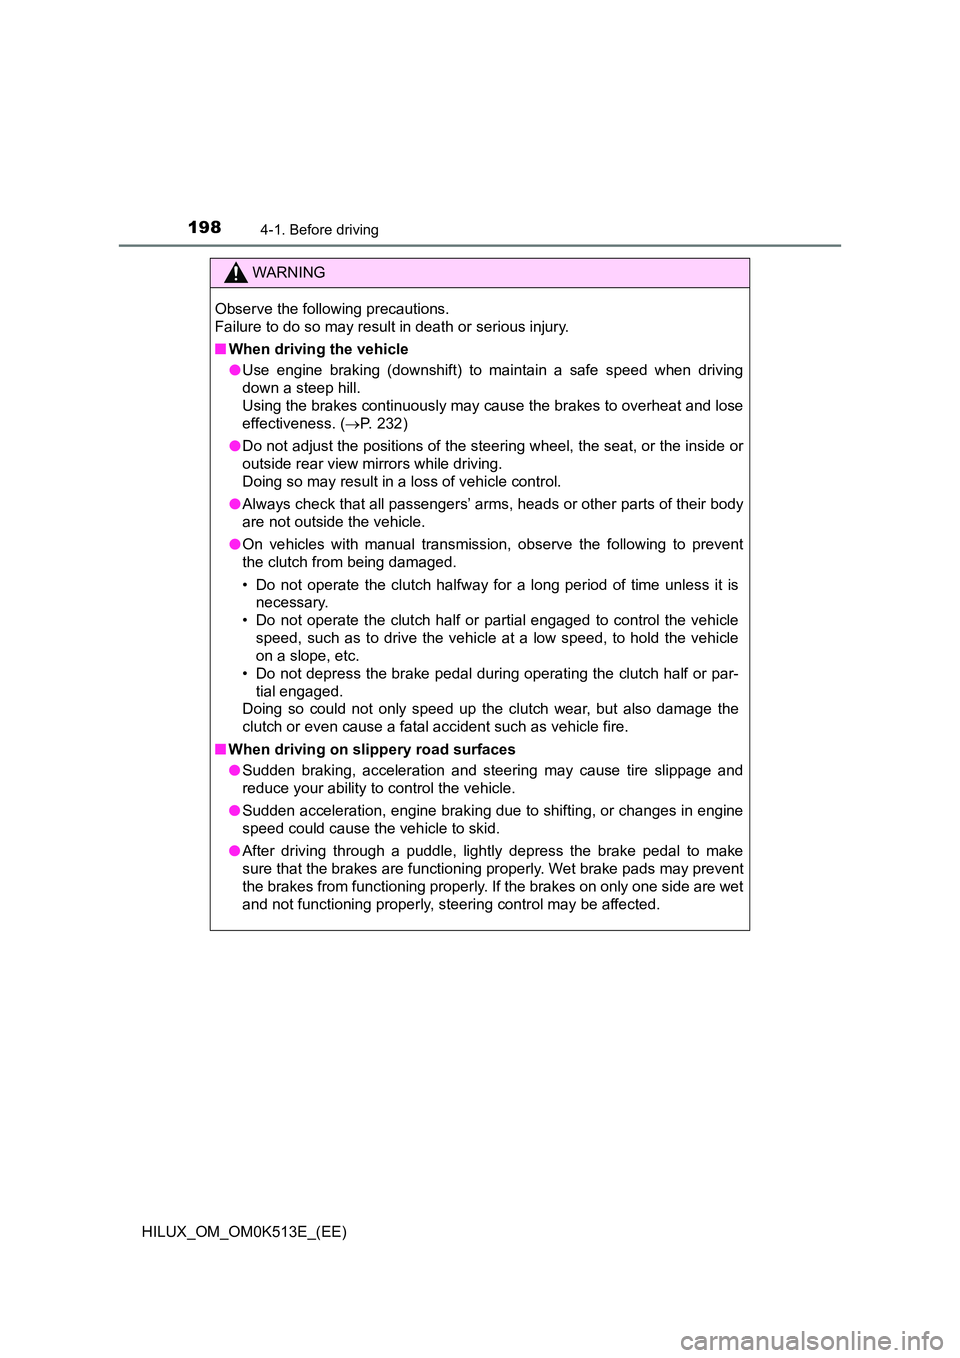 TOYOTA HILUX 2021  Owners Manual (in English) 1984-1. Before driving
HILUX_OM_OM0K513E_(EE)
WARNING
Observe the following precautions. 
Failure to do so may result in death or serious injury. 
�Q When driving the vehicle 
�O Use engine braking (d